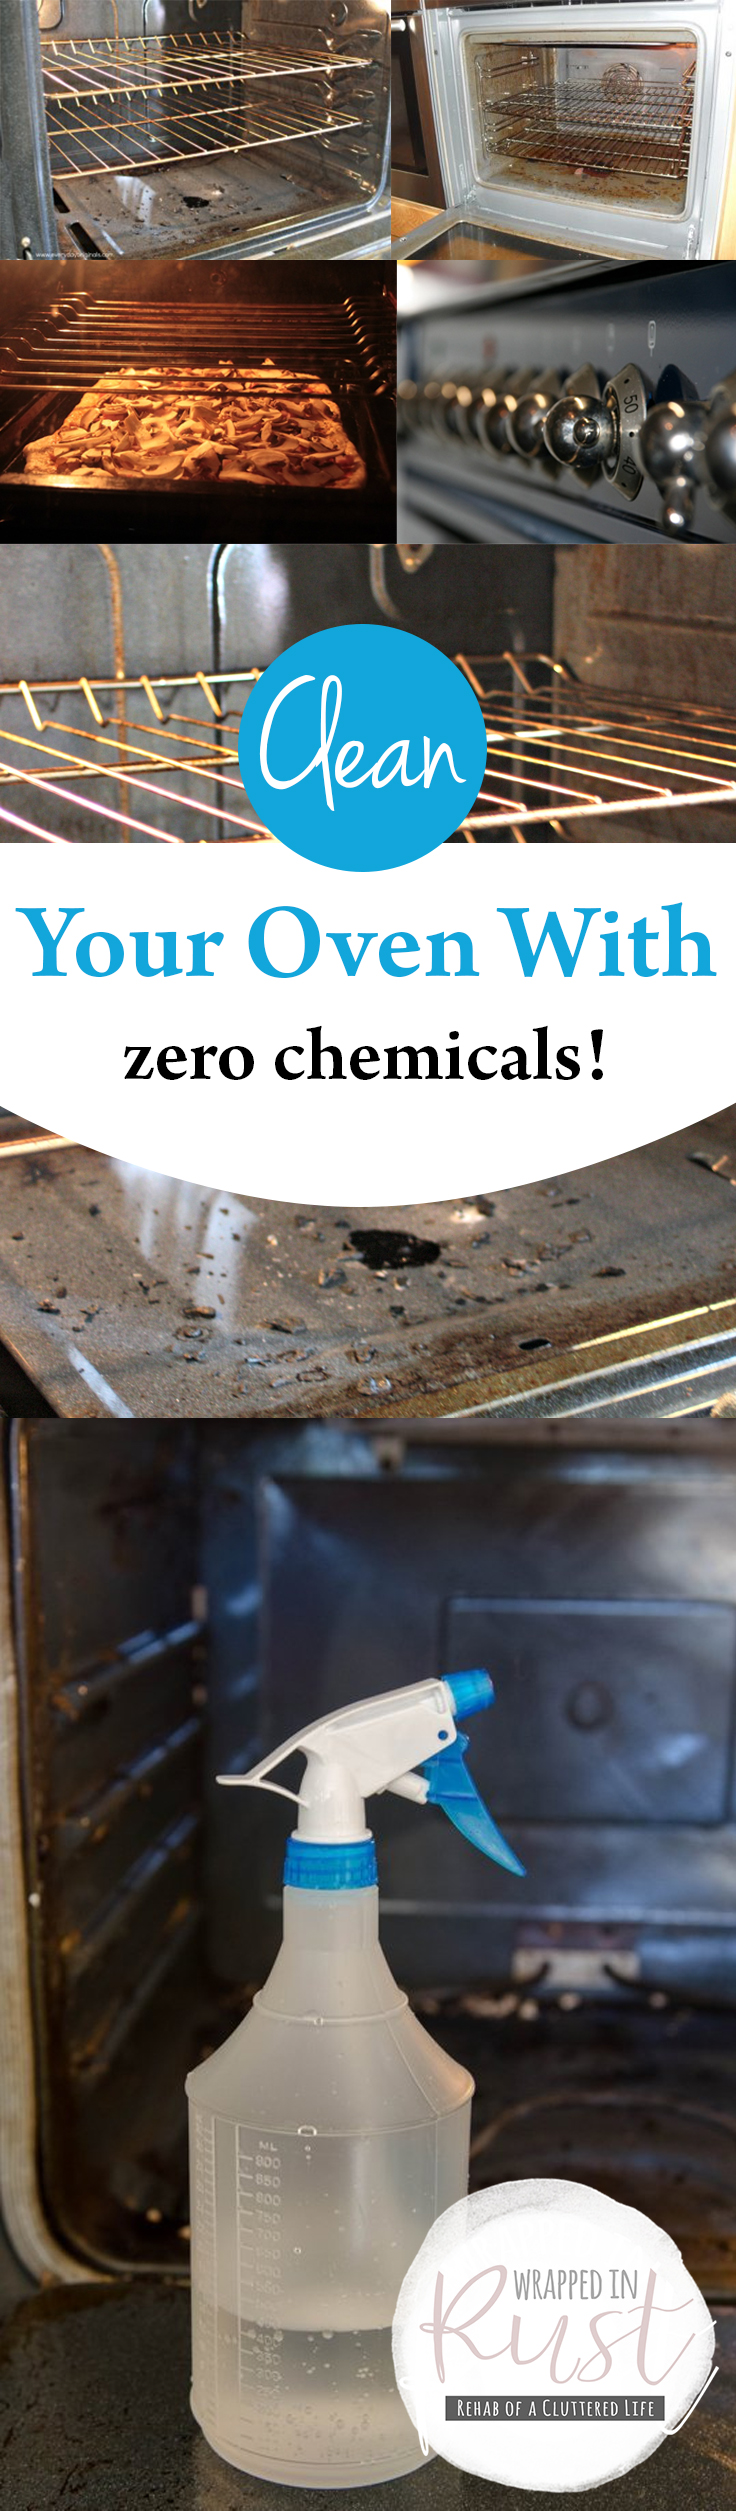 How to Clean Your Oven, Chemical Free Oven Cleaning, All Natural Oven Cleaning, Natural Ways to Clean Your Oven, Natural Ways to Clean Your Home, Cleaning, Cleaning TIps and Tricks, How to Clean Your Home, Popular Cleaning Pins.